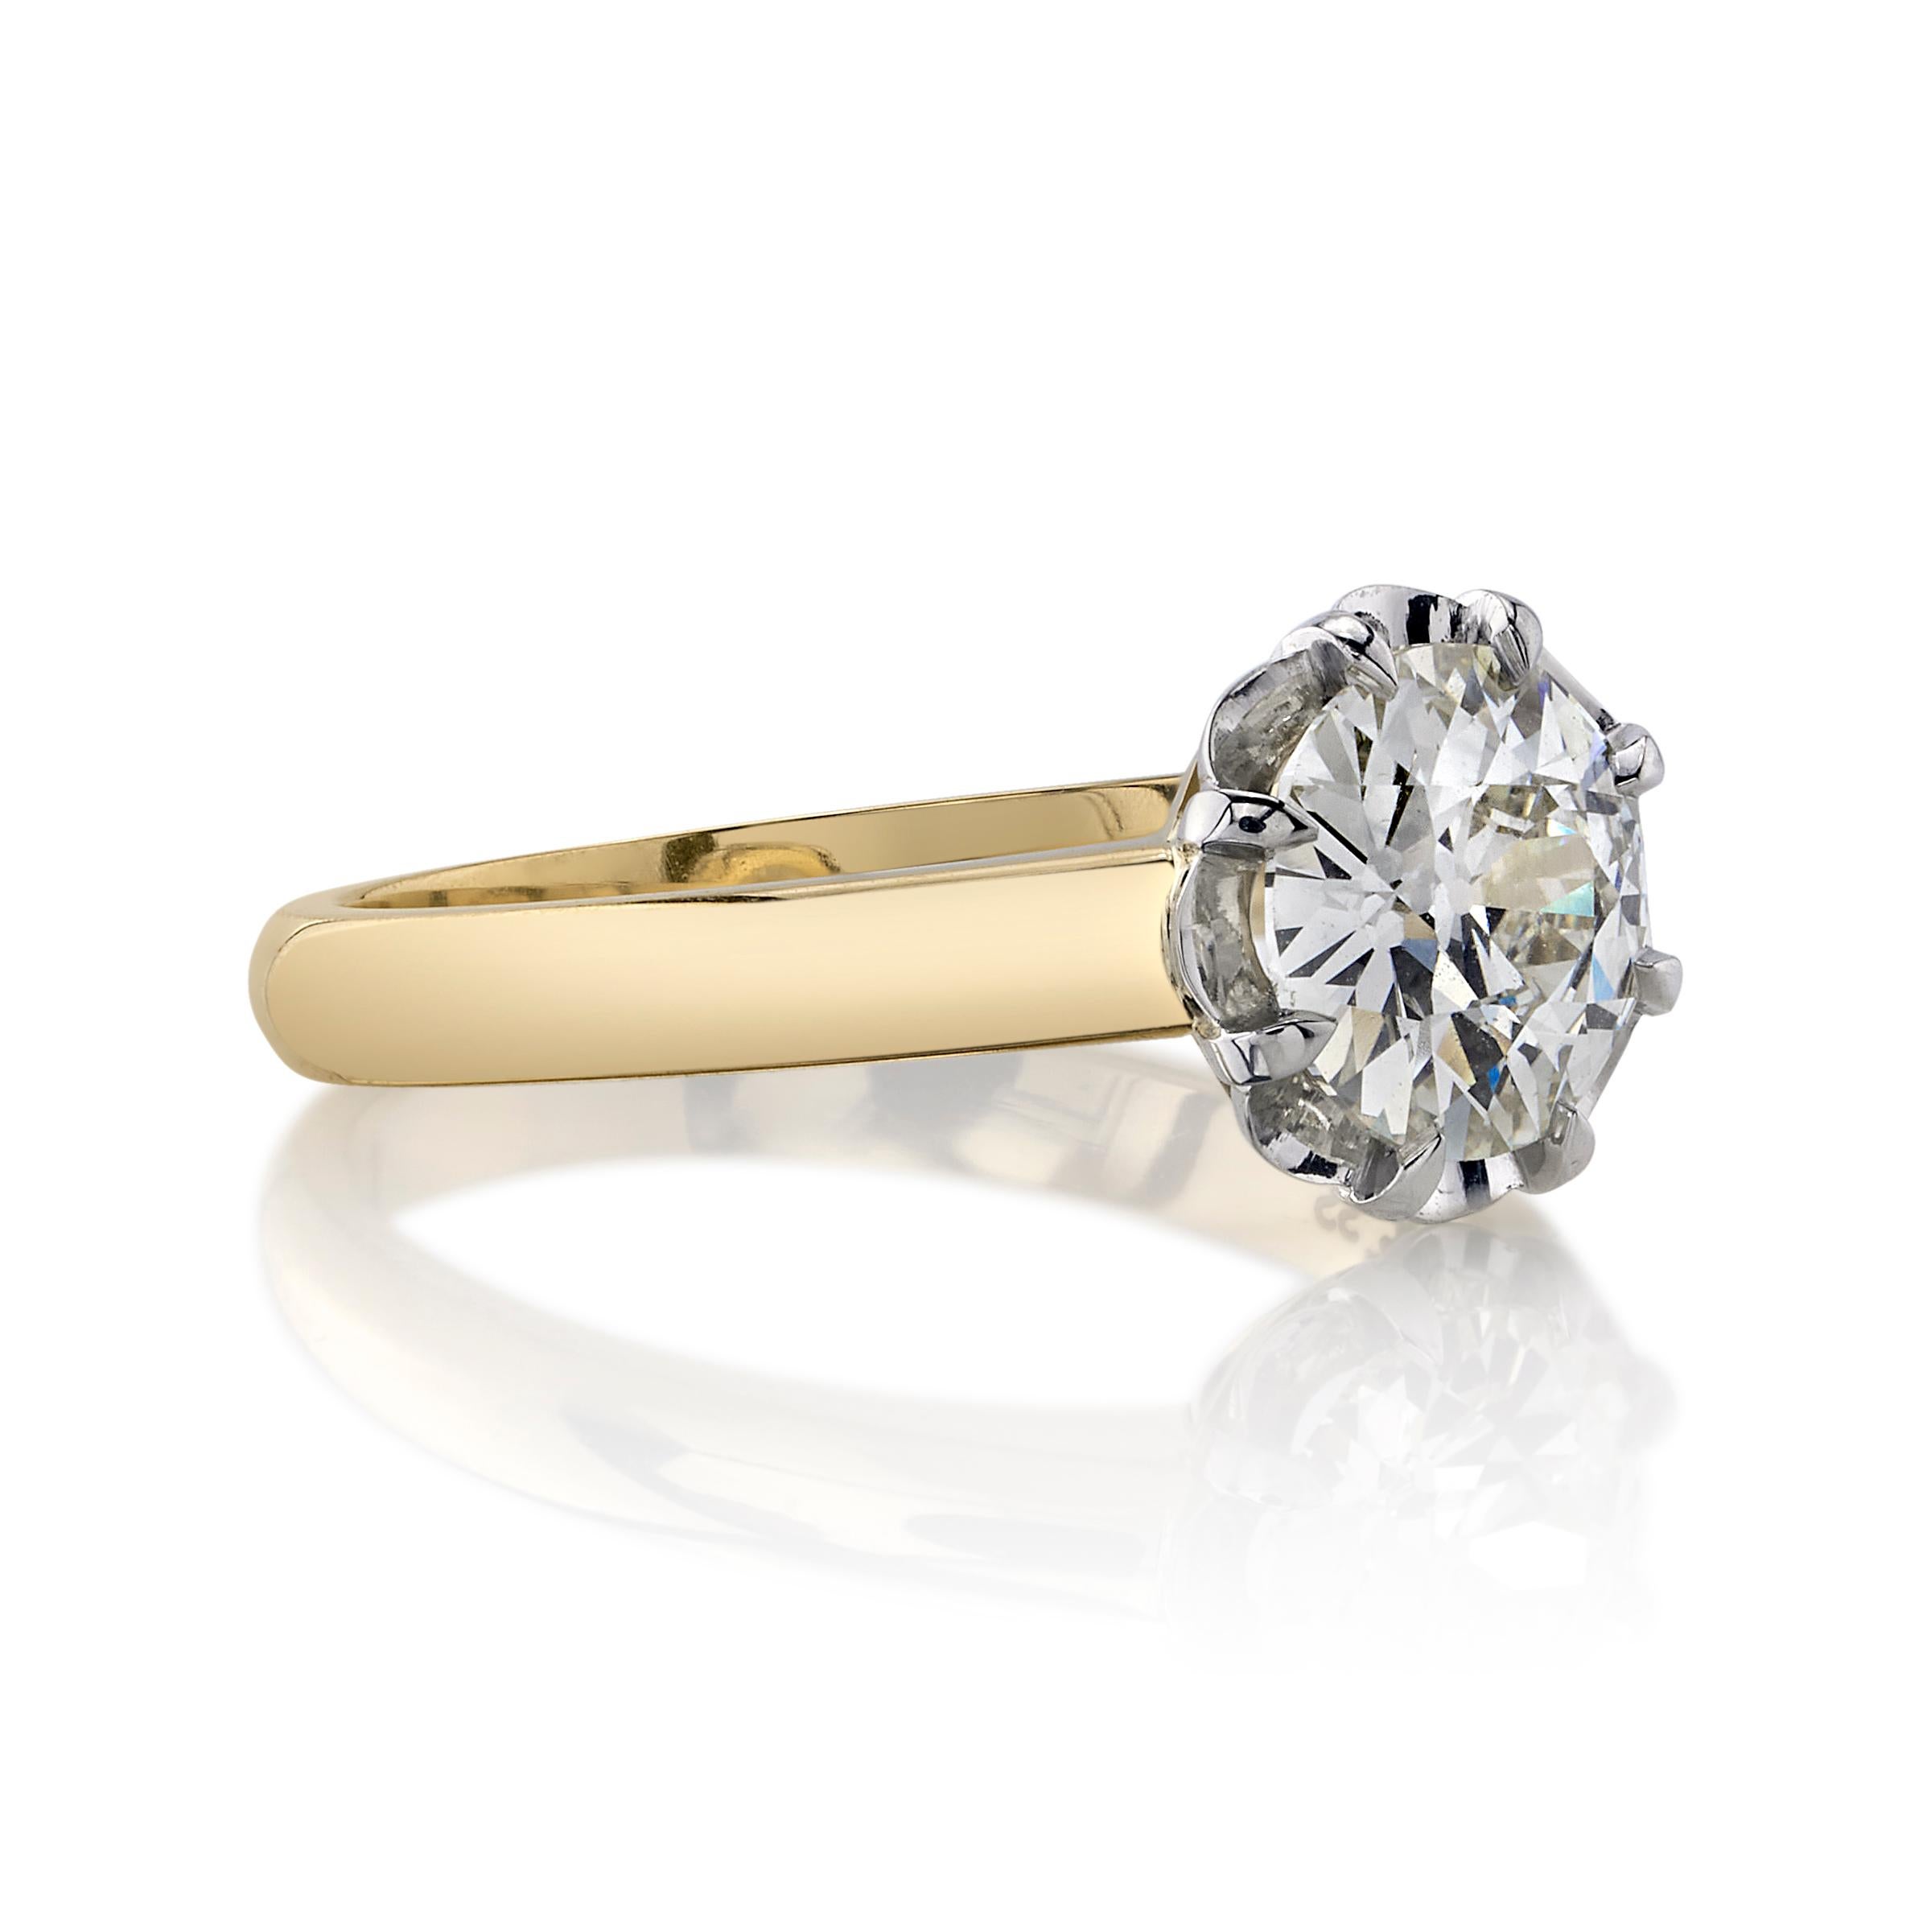 1.82ct M/SI2 GIA certified old European cut diamond set in a handcrafted 18K yellow gold and platinum mounting. 

Ring is currently a size 6 and can be sized to fit. 

Our jewelry is made locally in Los Angeles and most pieces are made to order. For